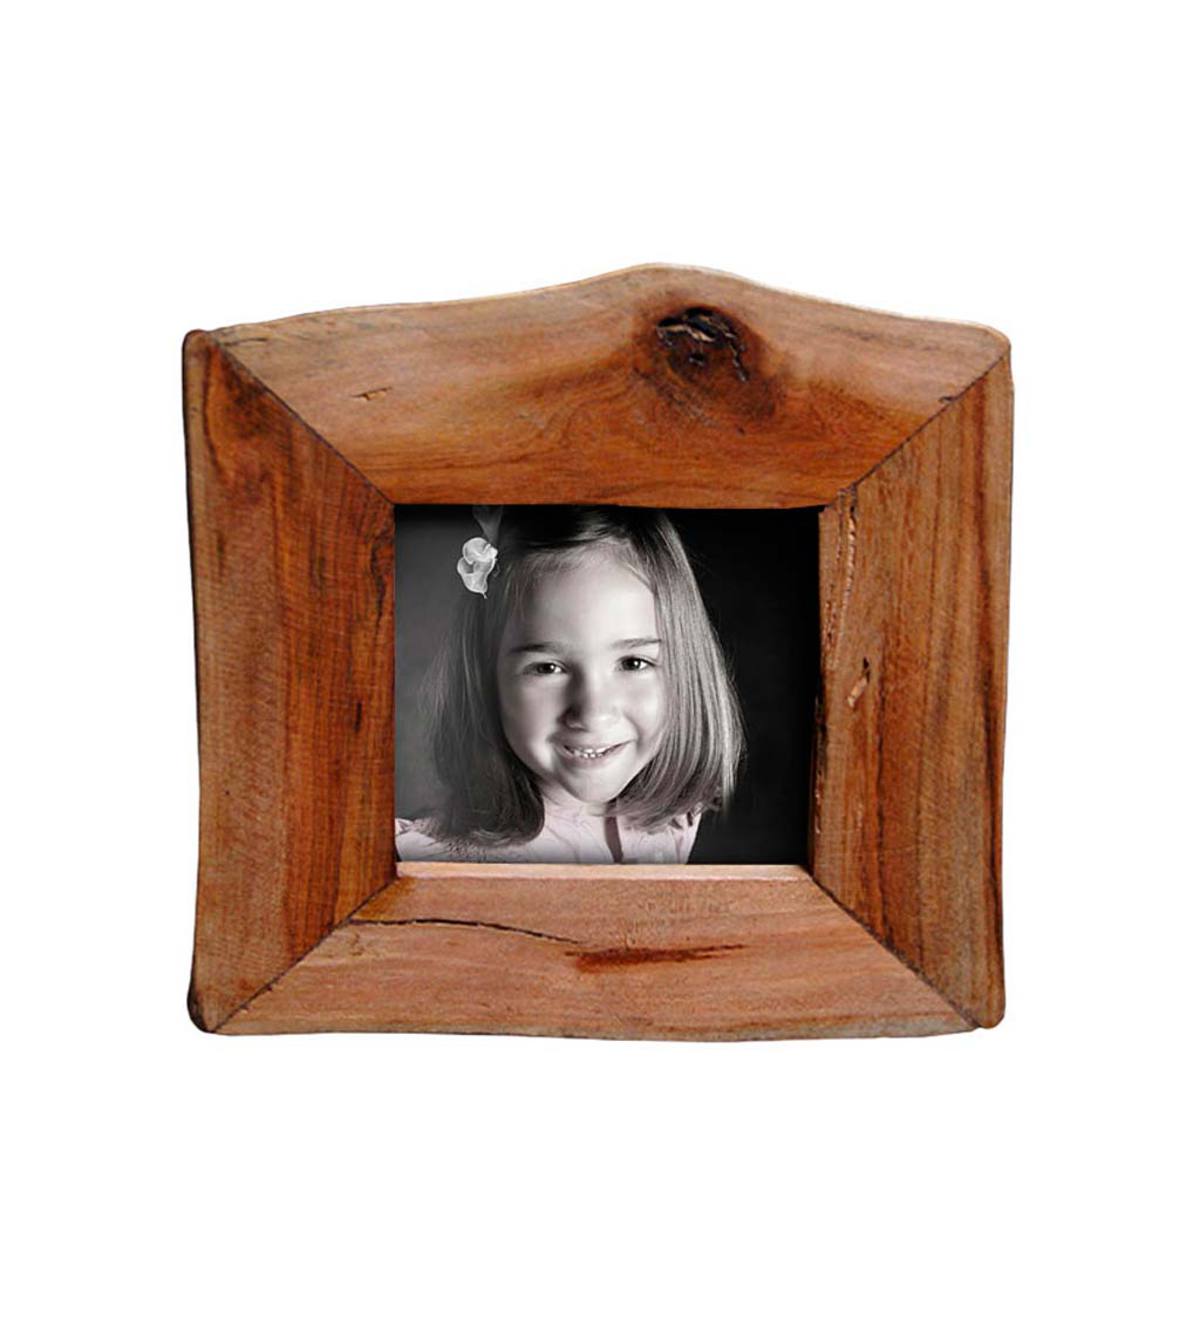 Reclaimed Natural Wood Frame 3.5"x3.5"